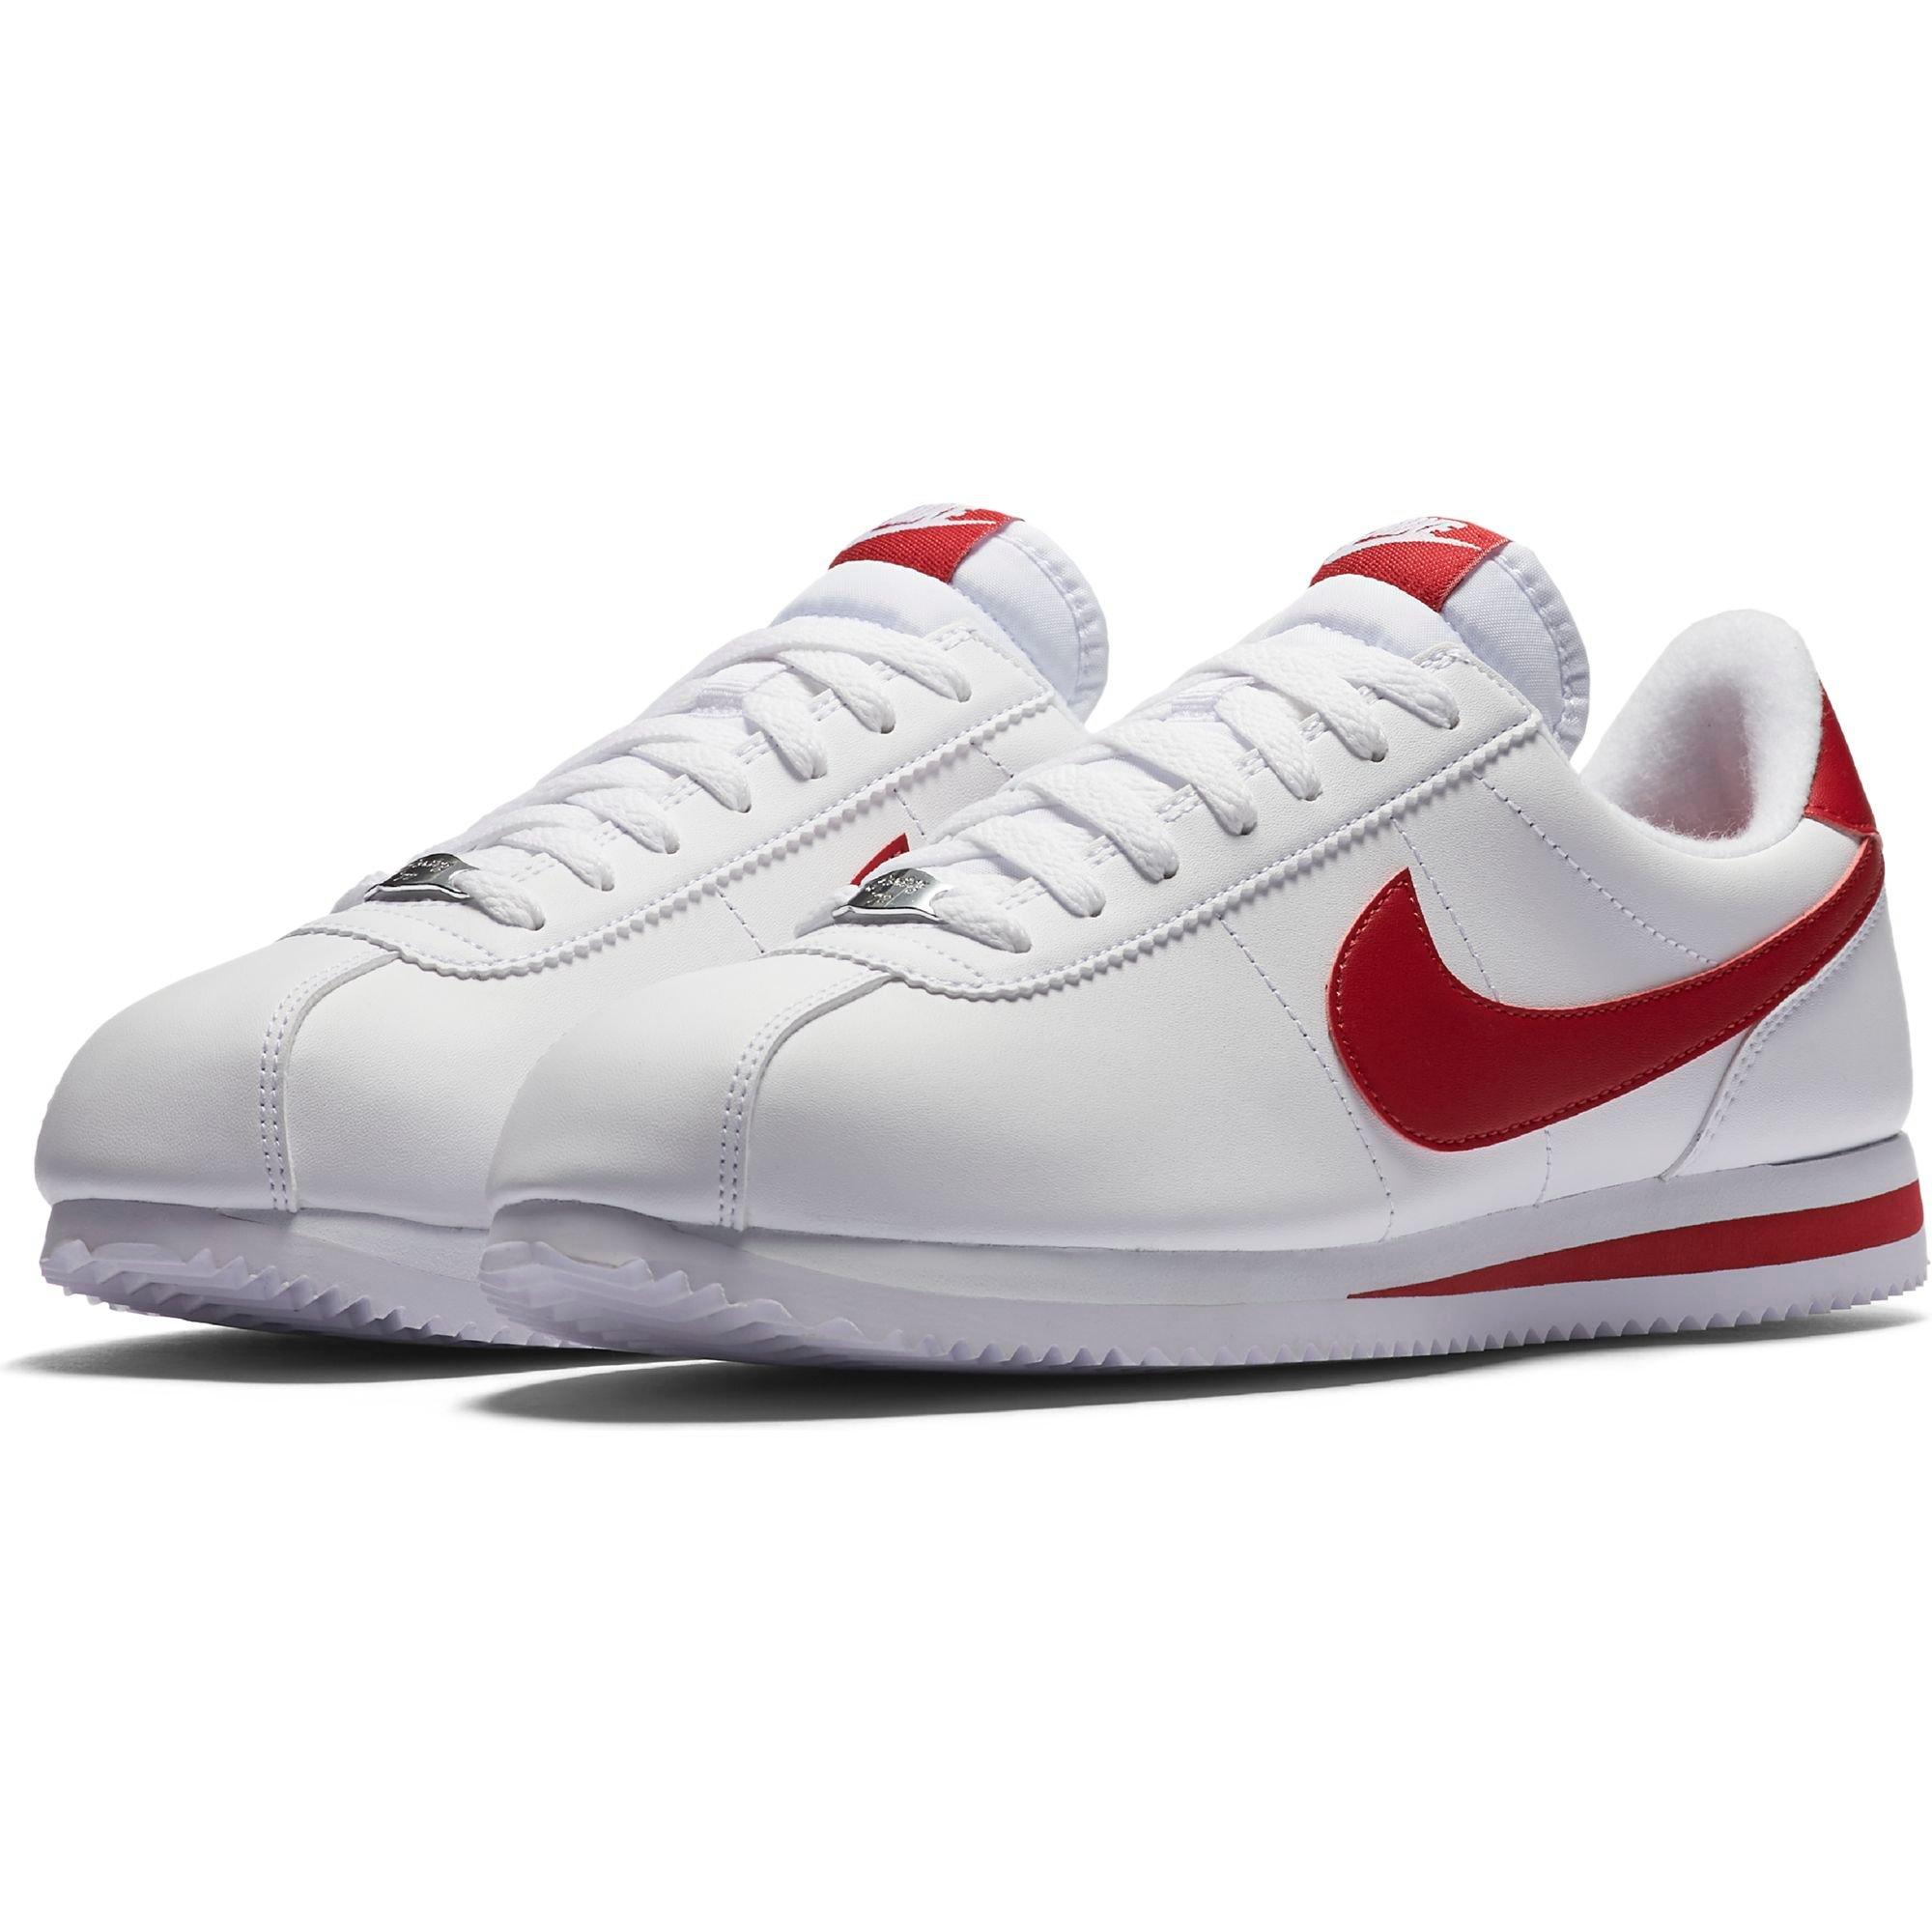 red and white cortez shoes